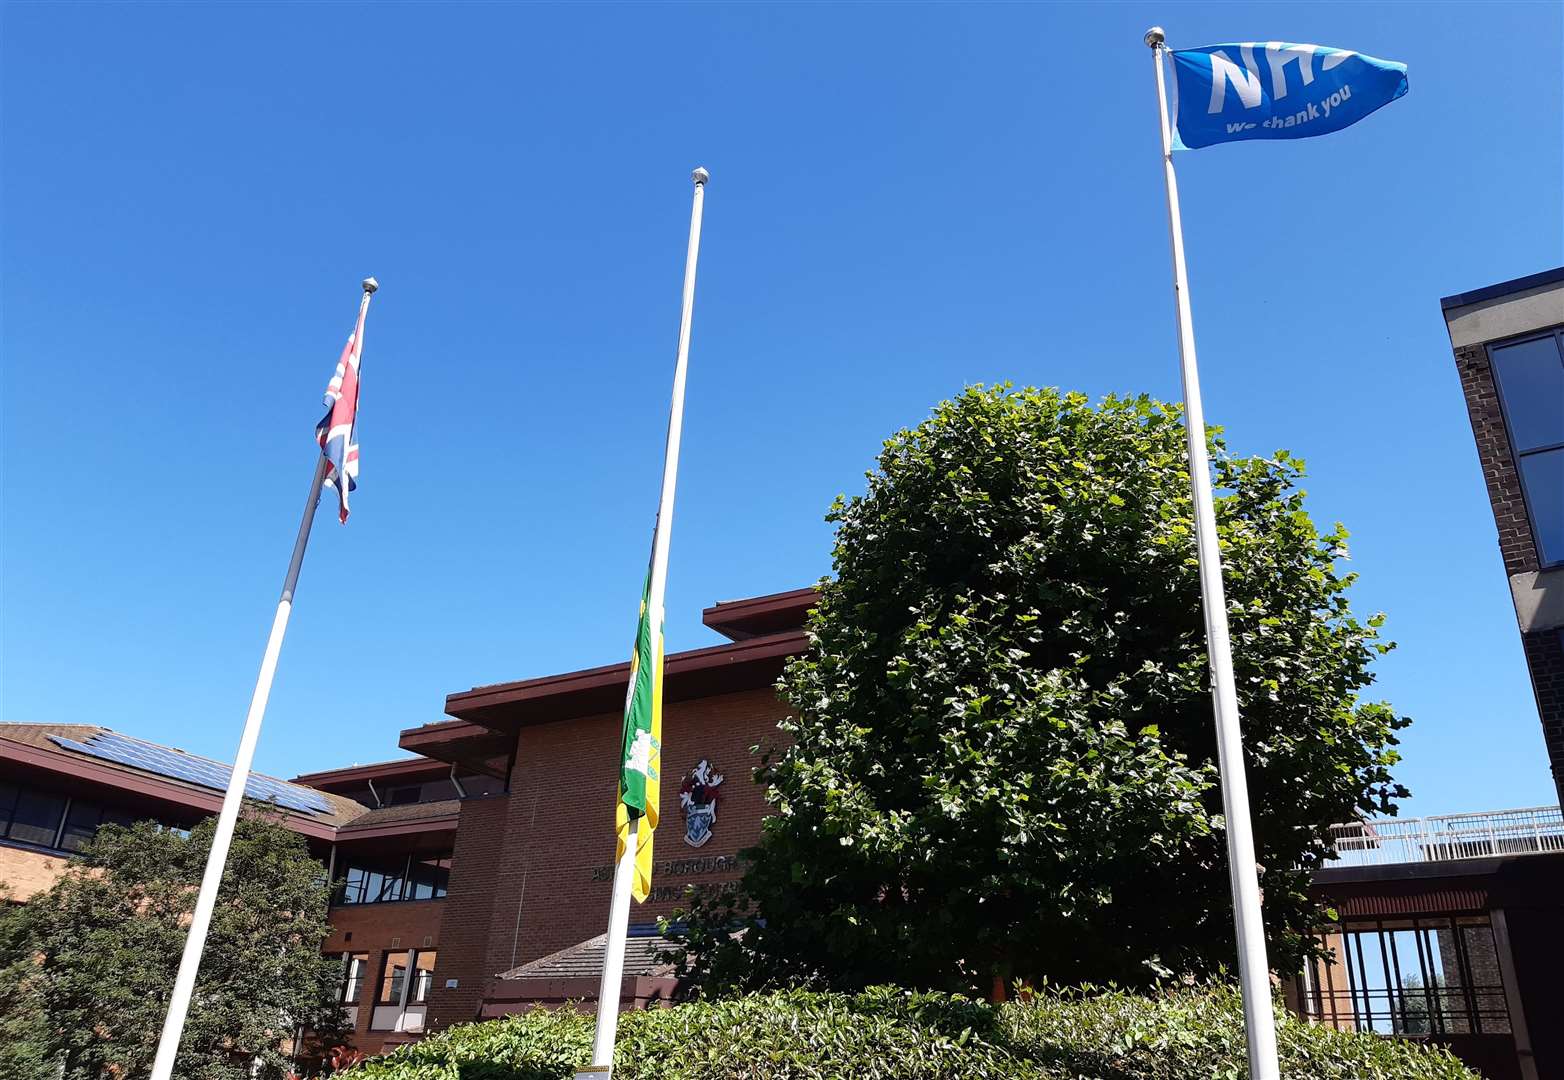 The Ashford Borough Council flag is flying at half-mast outside the Civic Centre